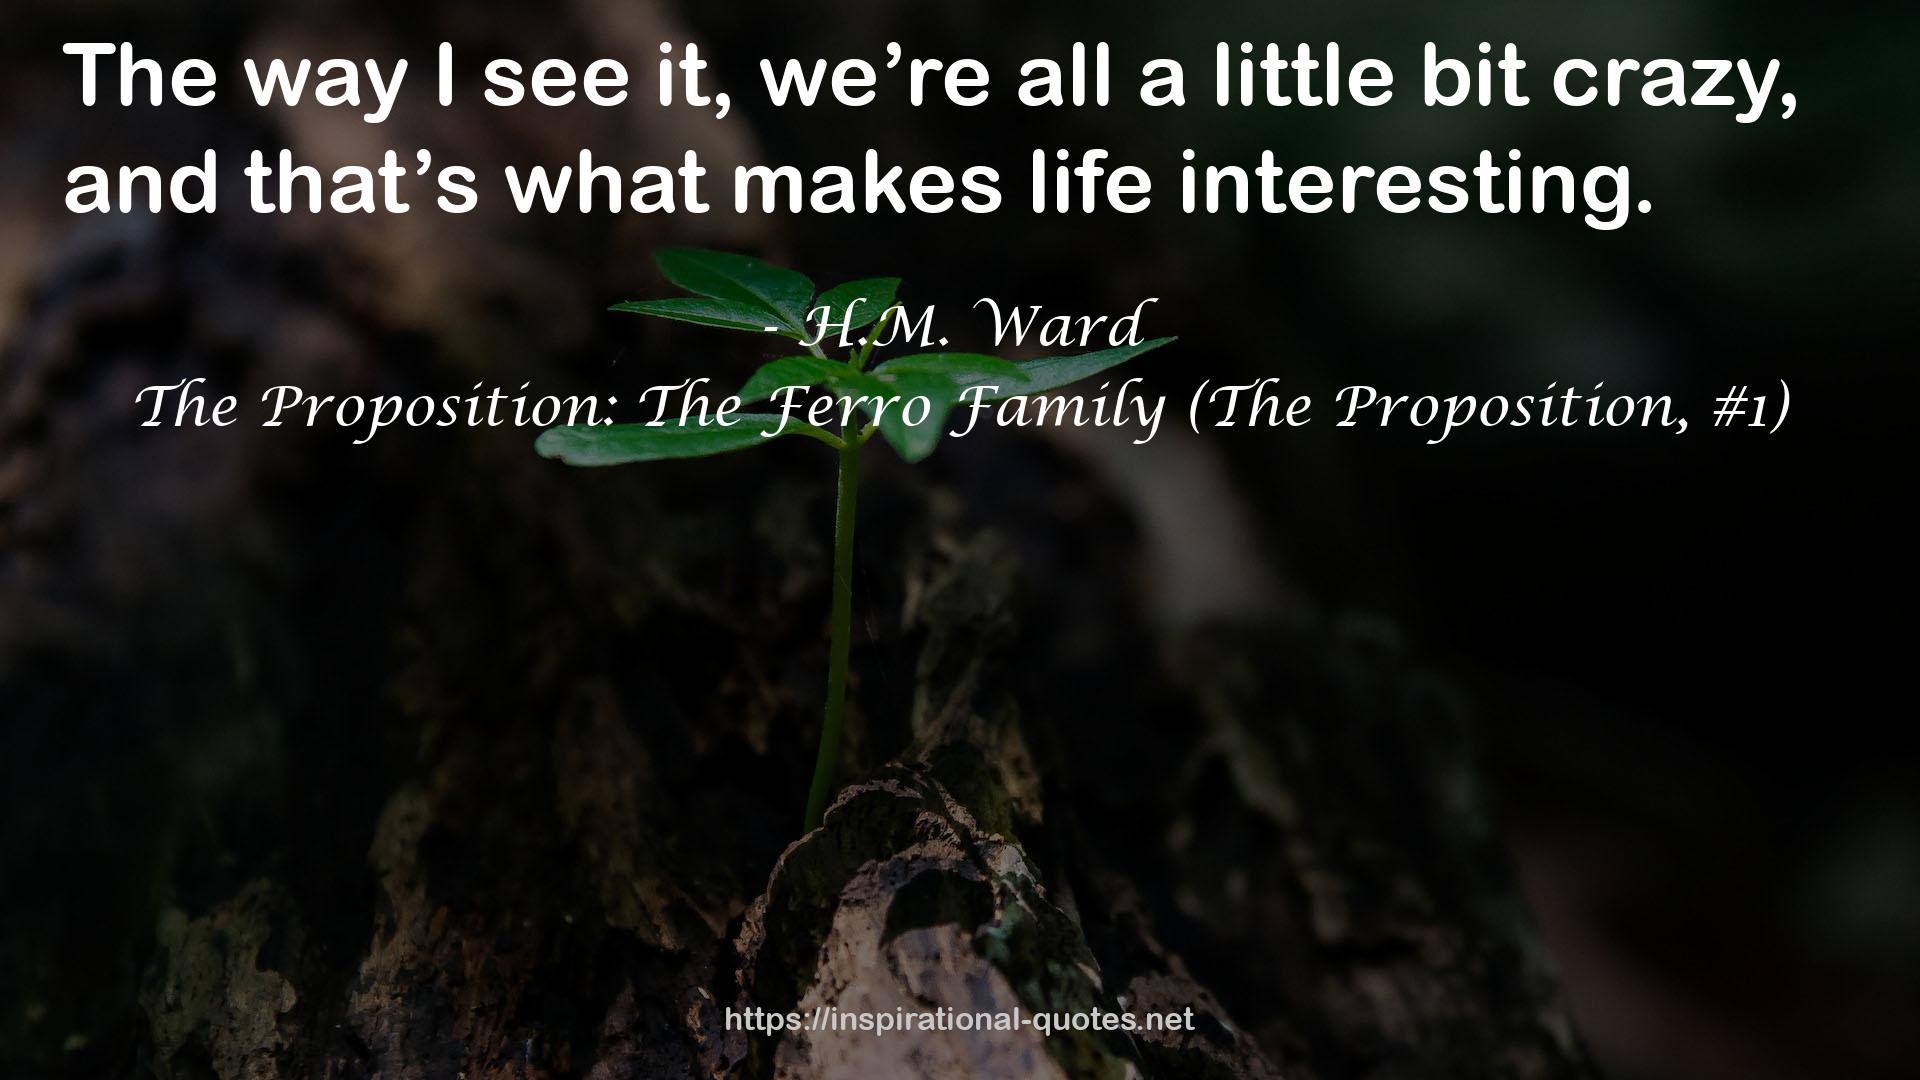 The Proposition: The Ferro Family (The Proposition, #1) QUOTES